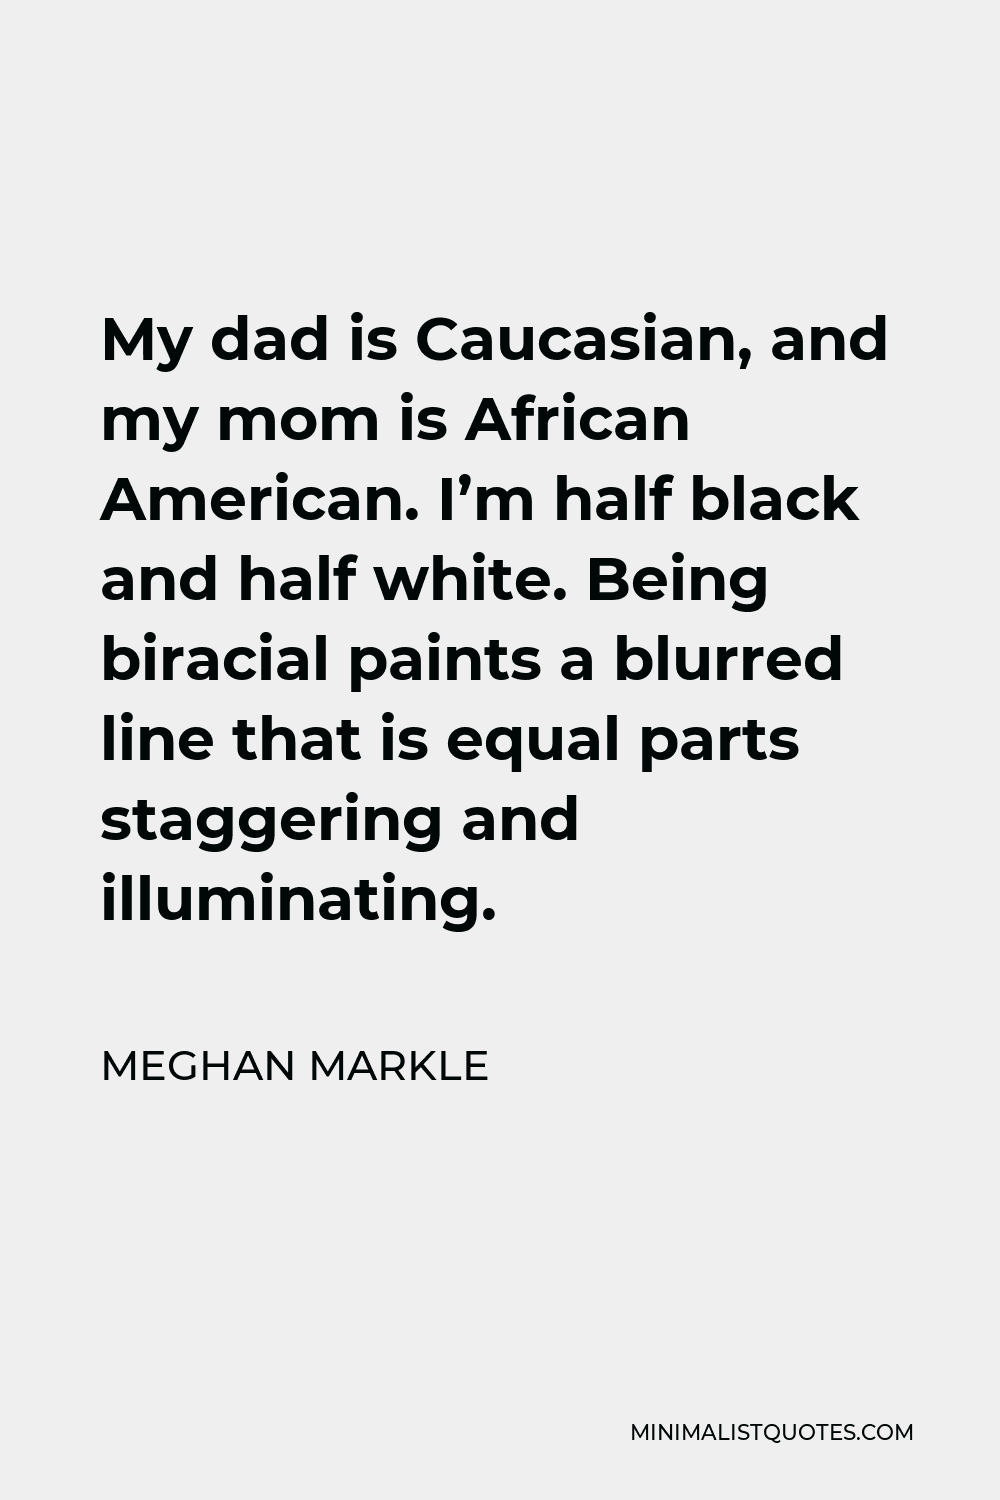 Meghan Markle Quote - My dad is Caucasian, and my mom is African American. I’m half black and half white. Being biracial paints a blurred line that is equal parts staggering and illuminating.